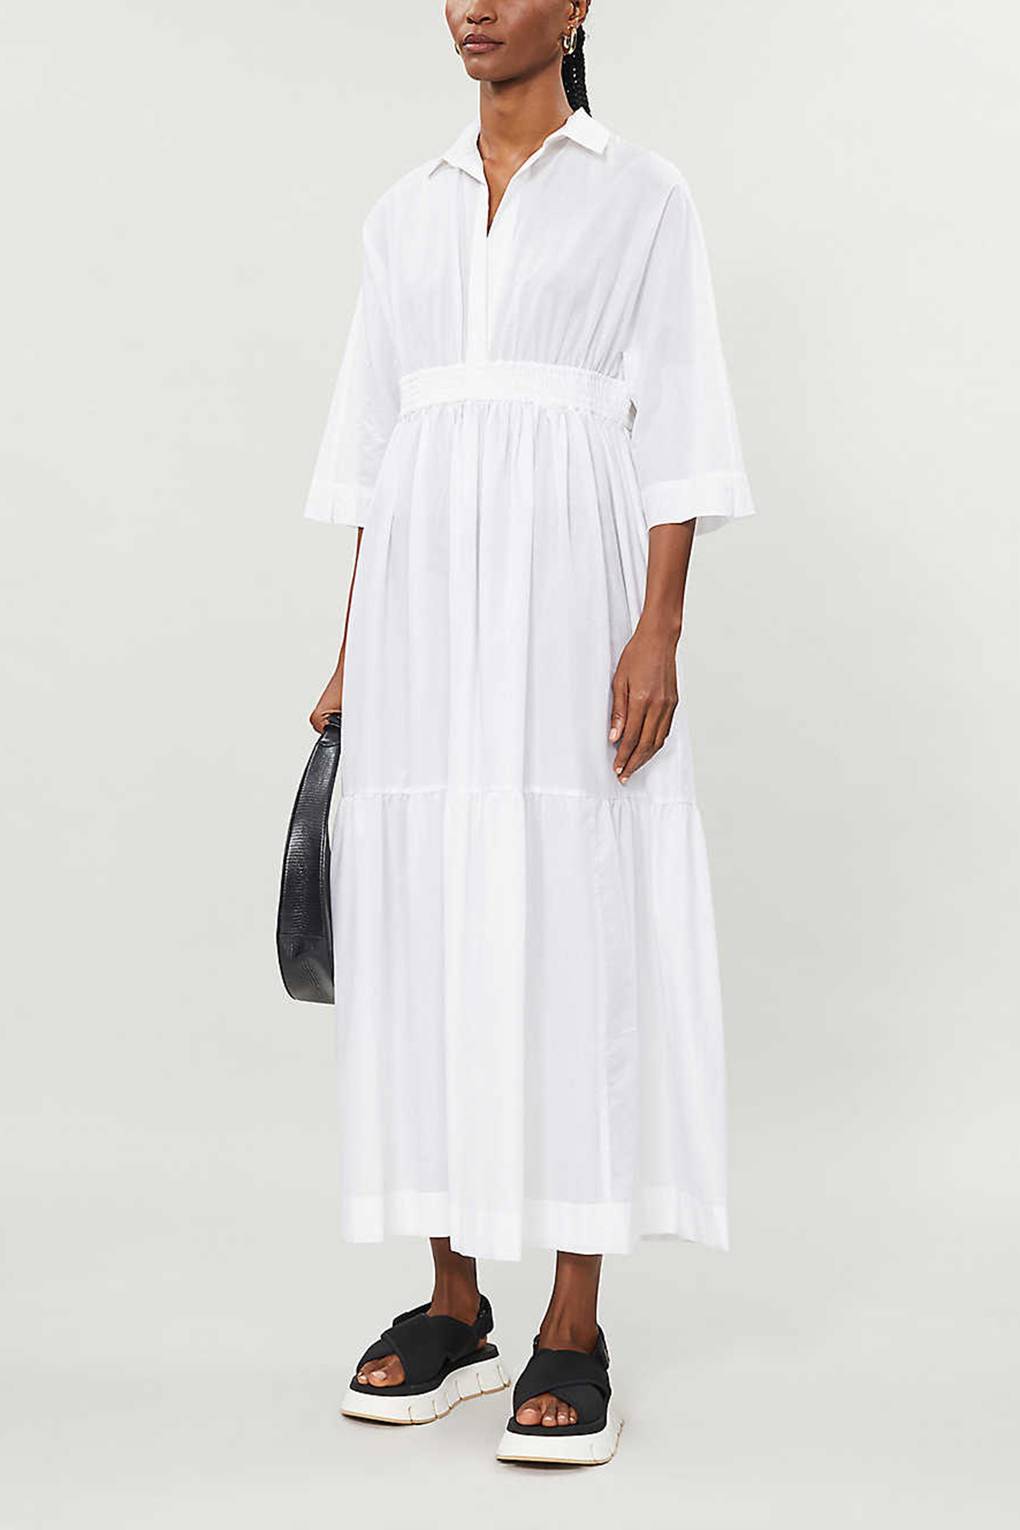 Summer Dresses 2020: Midi, Maxi, Cotton And Casual Dresses | Glamour UK